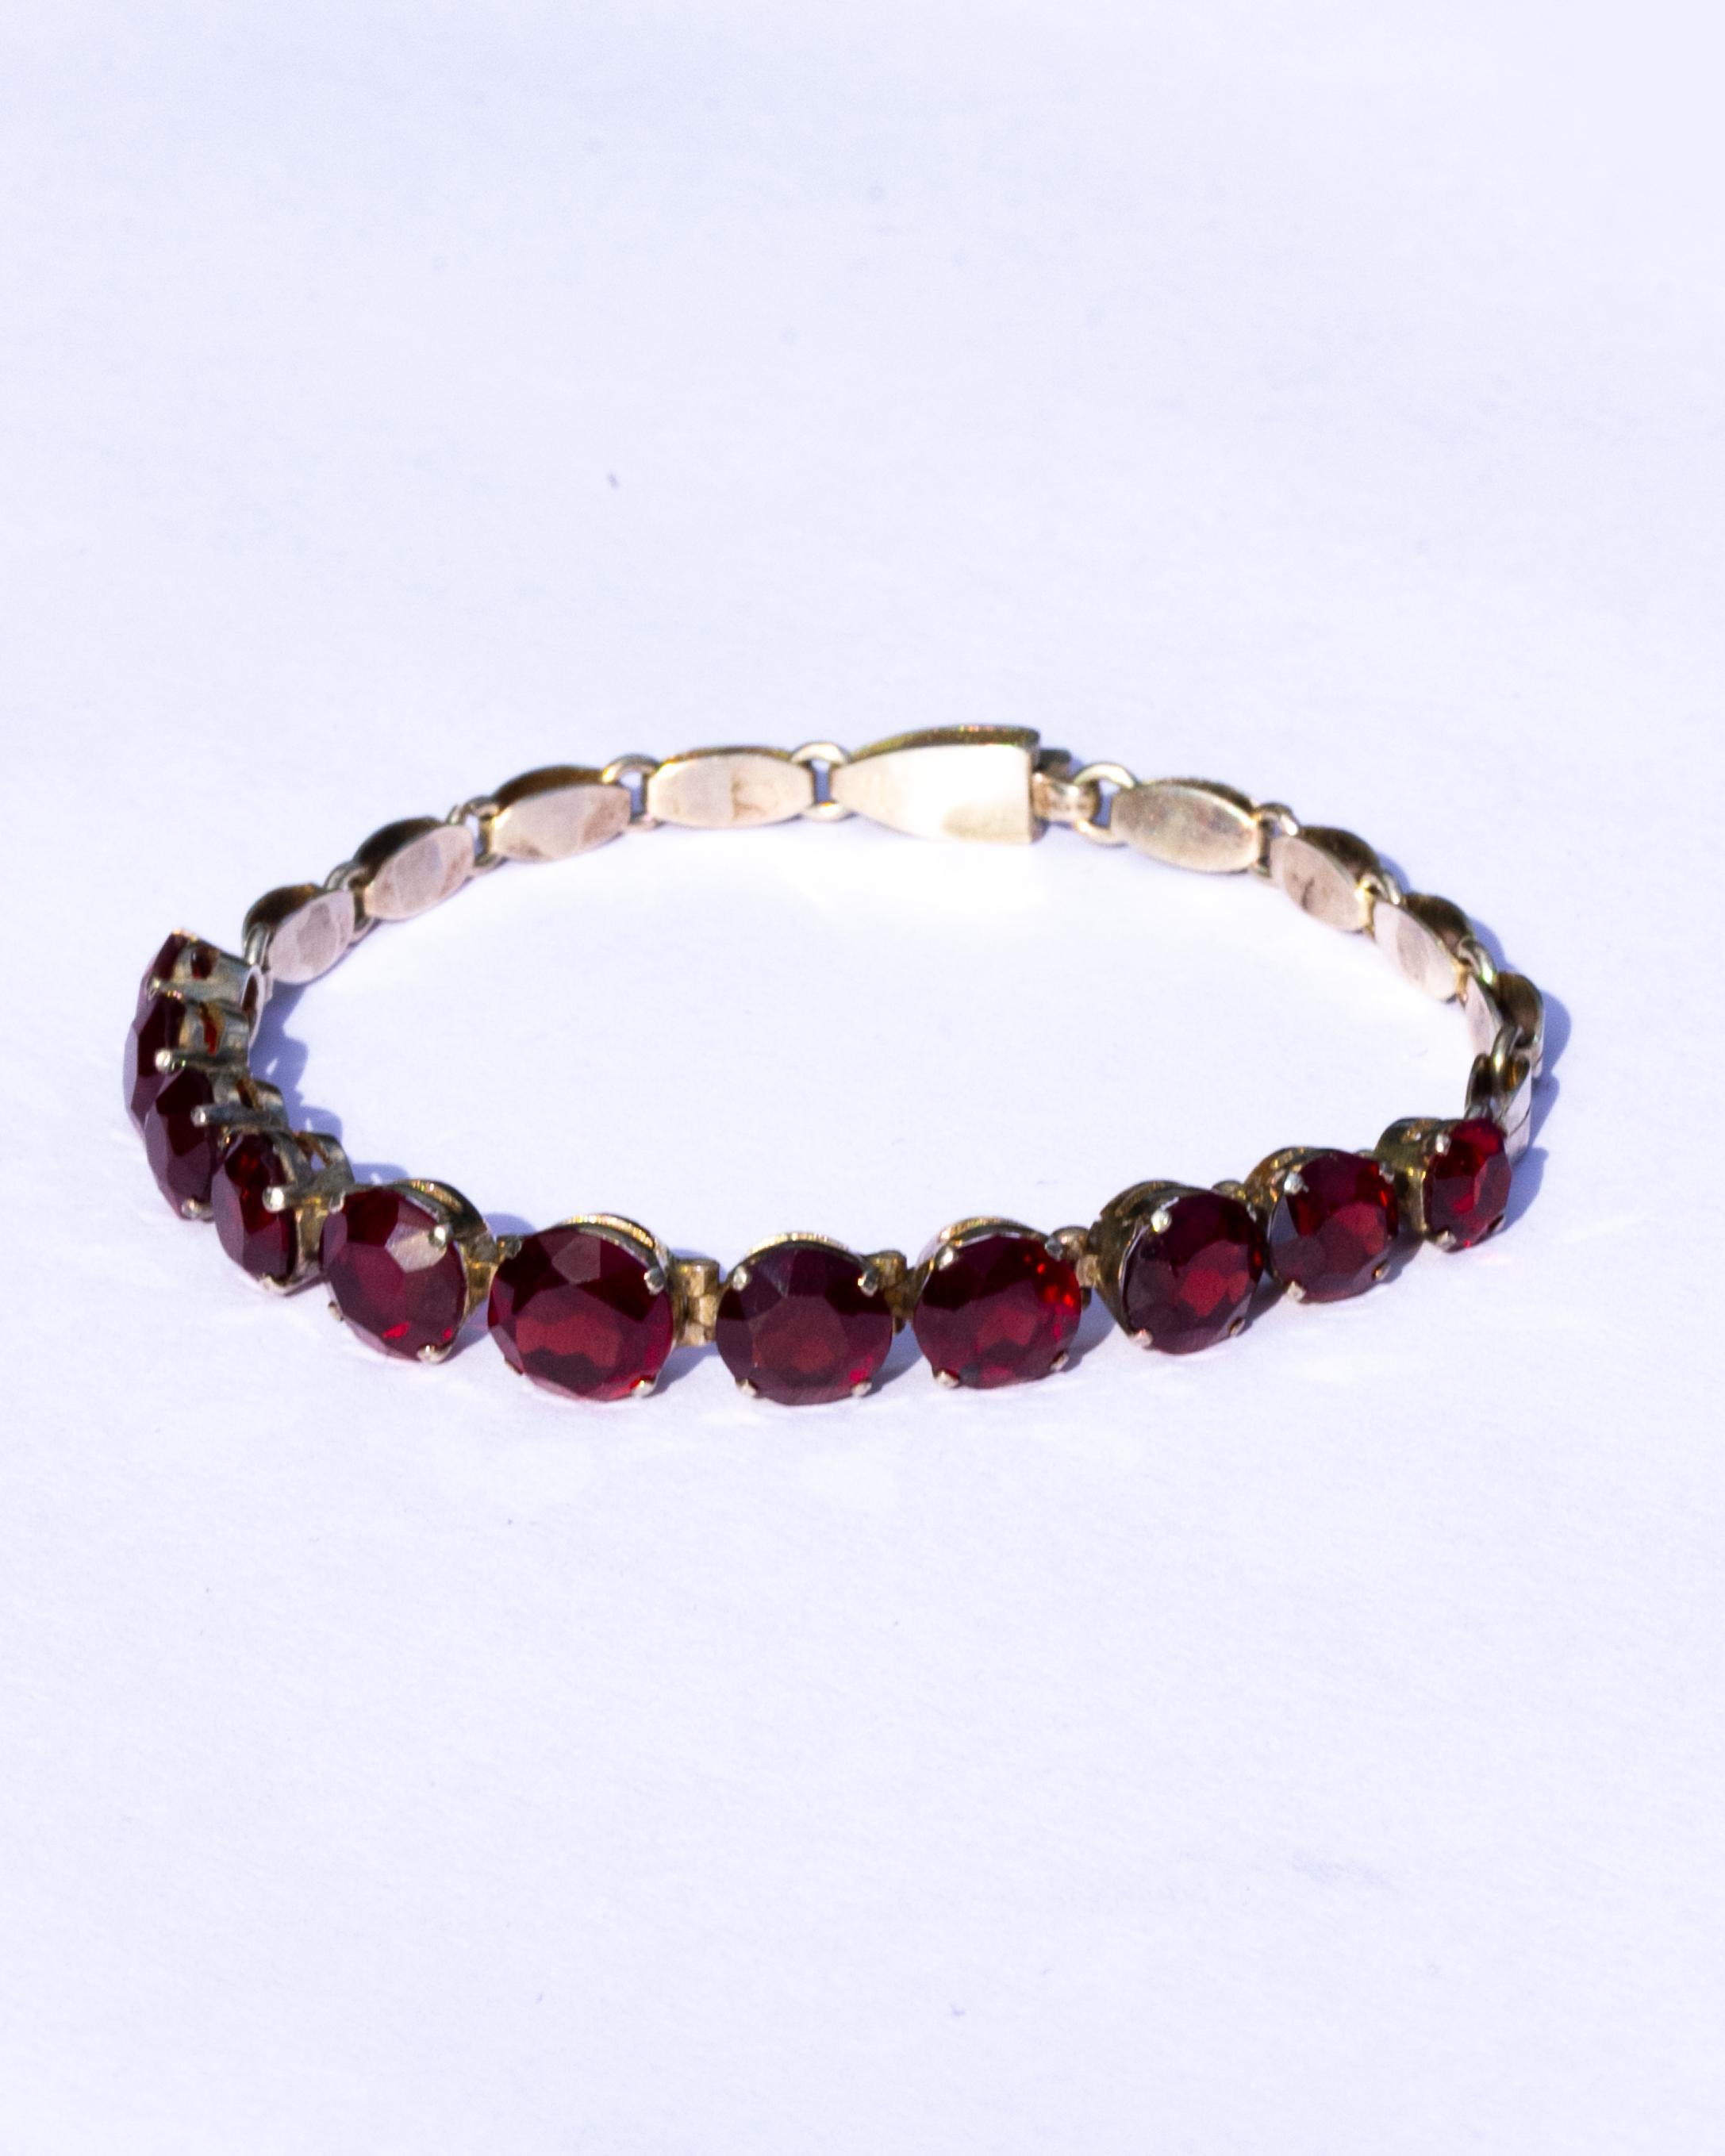 This gorgeous bracelet holds orbs of cut garnet which catch the light beautifully. This bracelet and the stones are all set and modelled in silver. The widest stone measures 8mm and the smallest measures 3.5mm. 

Length: 18.5cm
Width: 8mm

Weight: